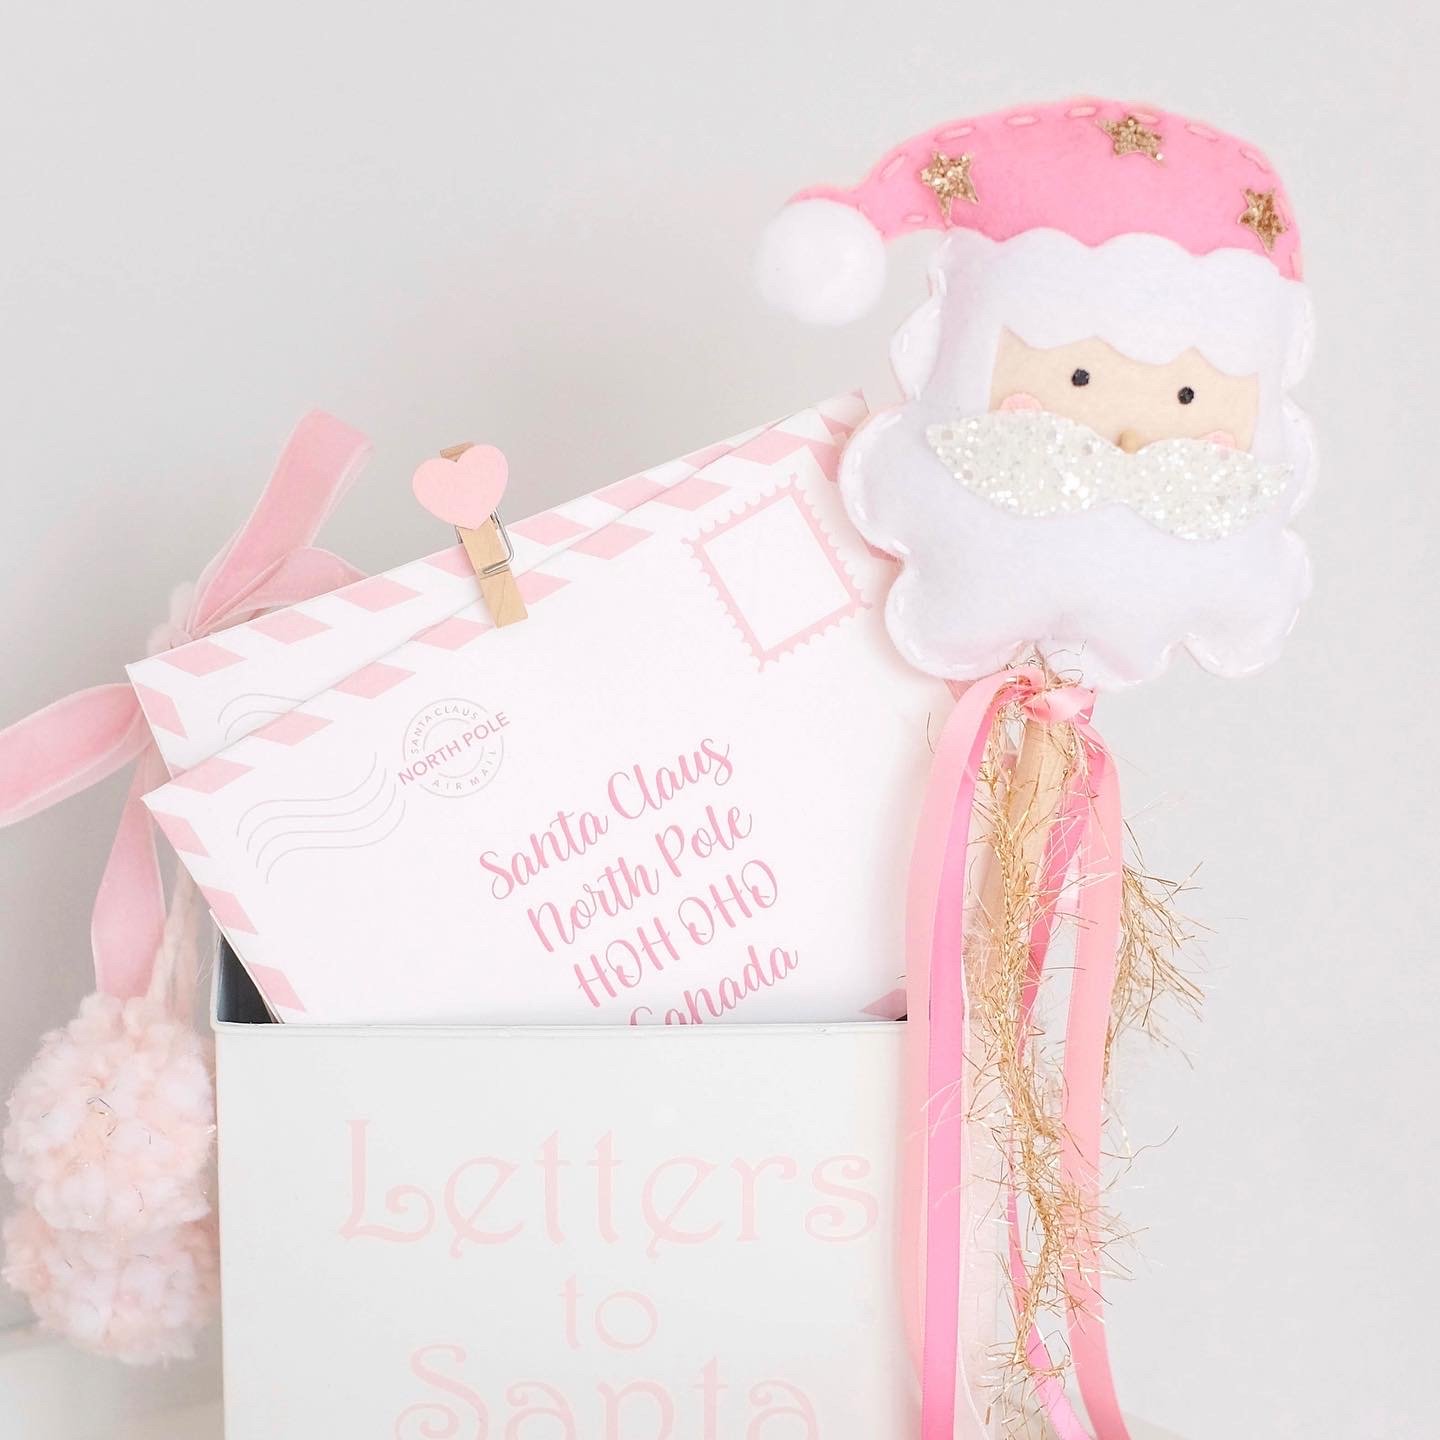 Send the cutest letter to santa